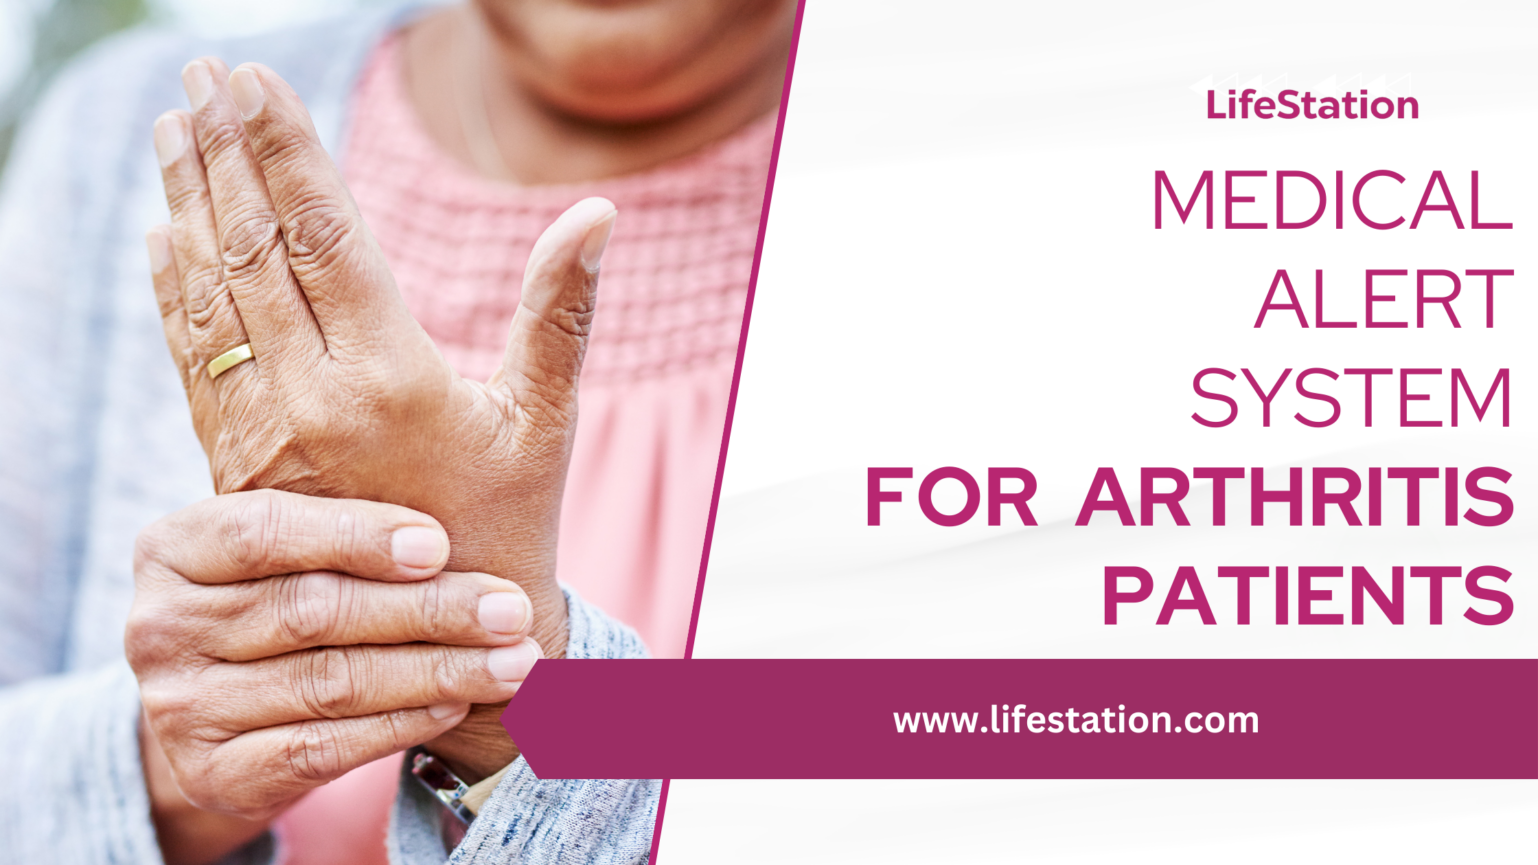 Secure your peace of mind with LifeStation's alert system for arthritis patients - help is just a click away.